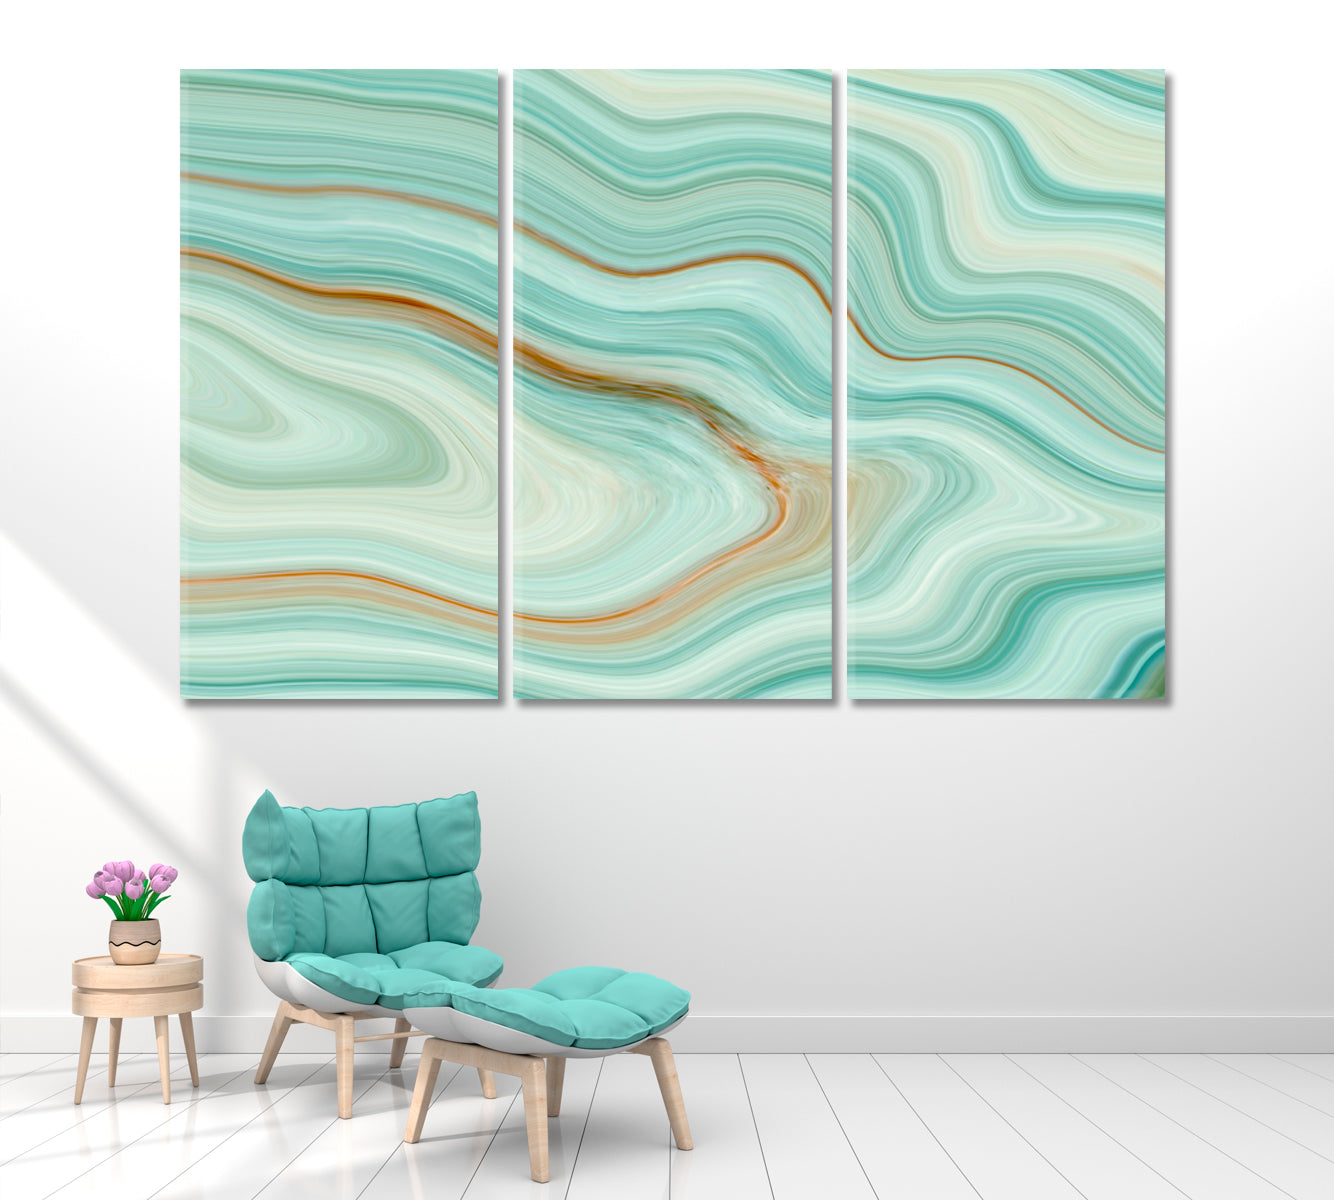 Wavy Marble or Ripple Agate Canvas Print ArtLexy 3 Panels 36"x24" inches 